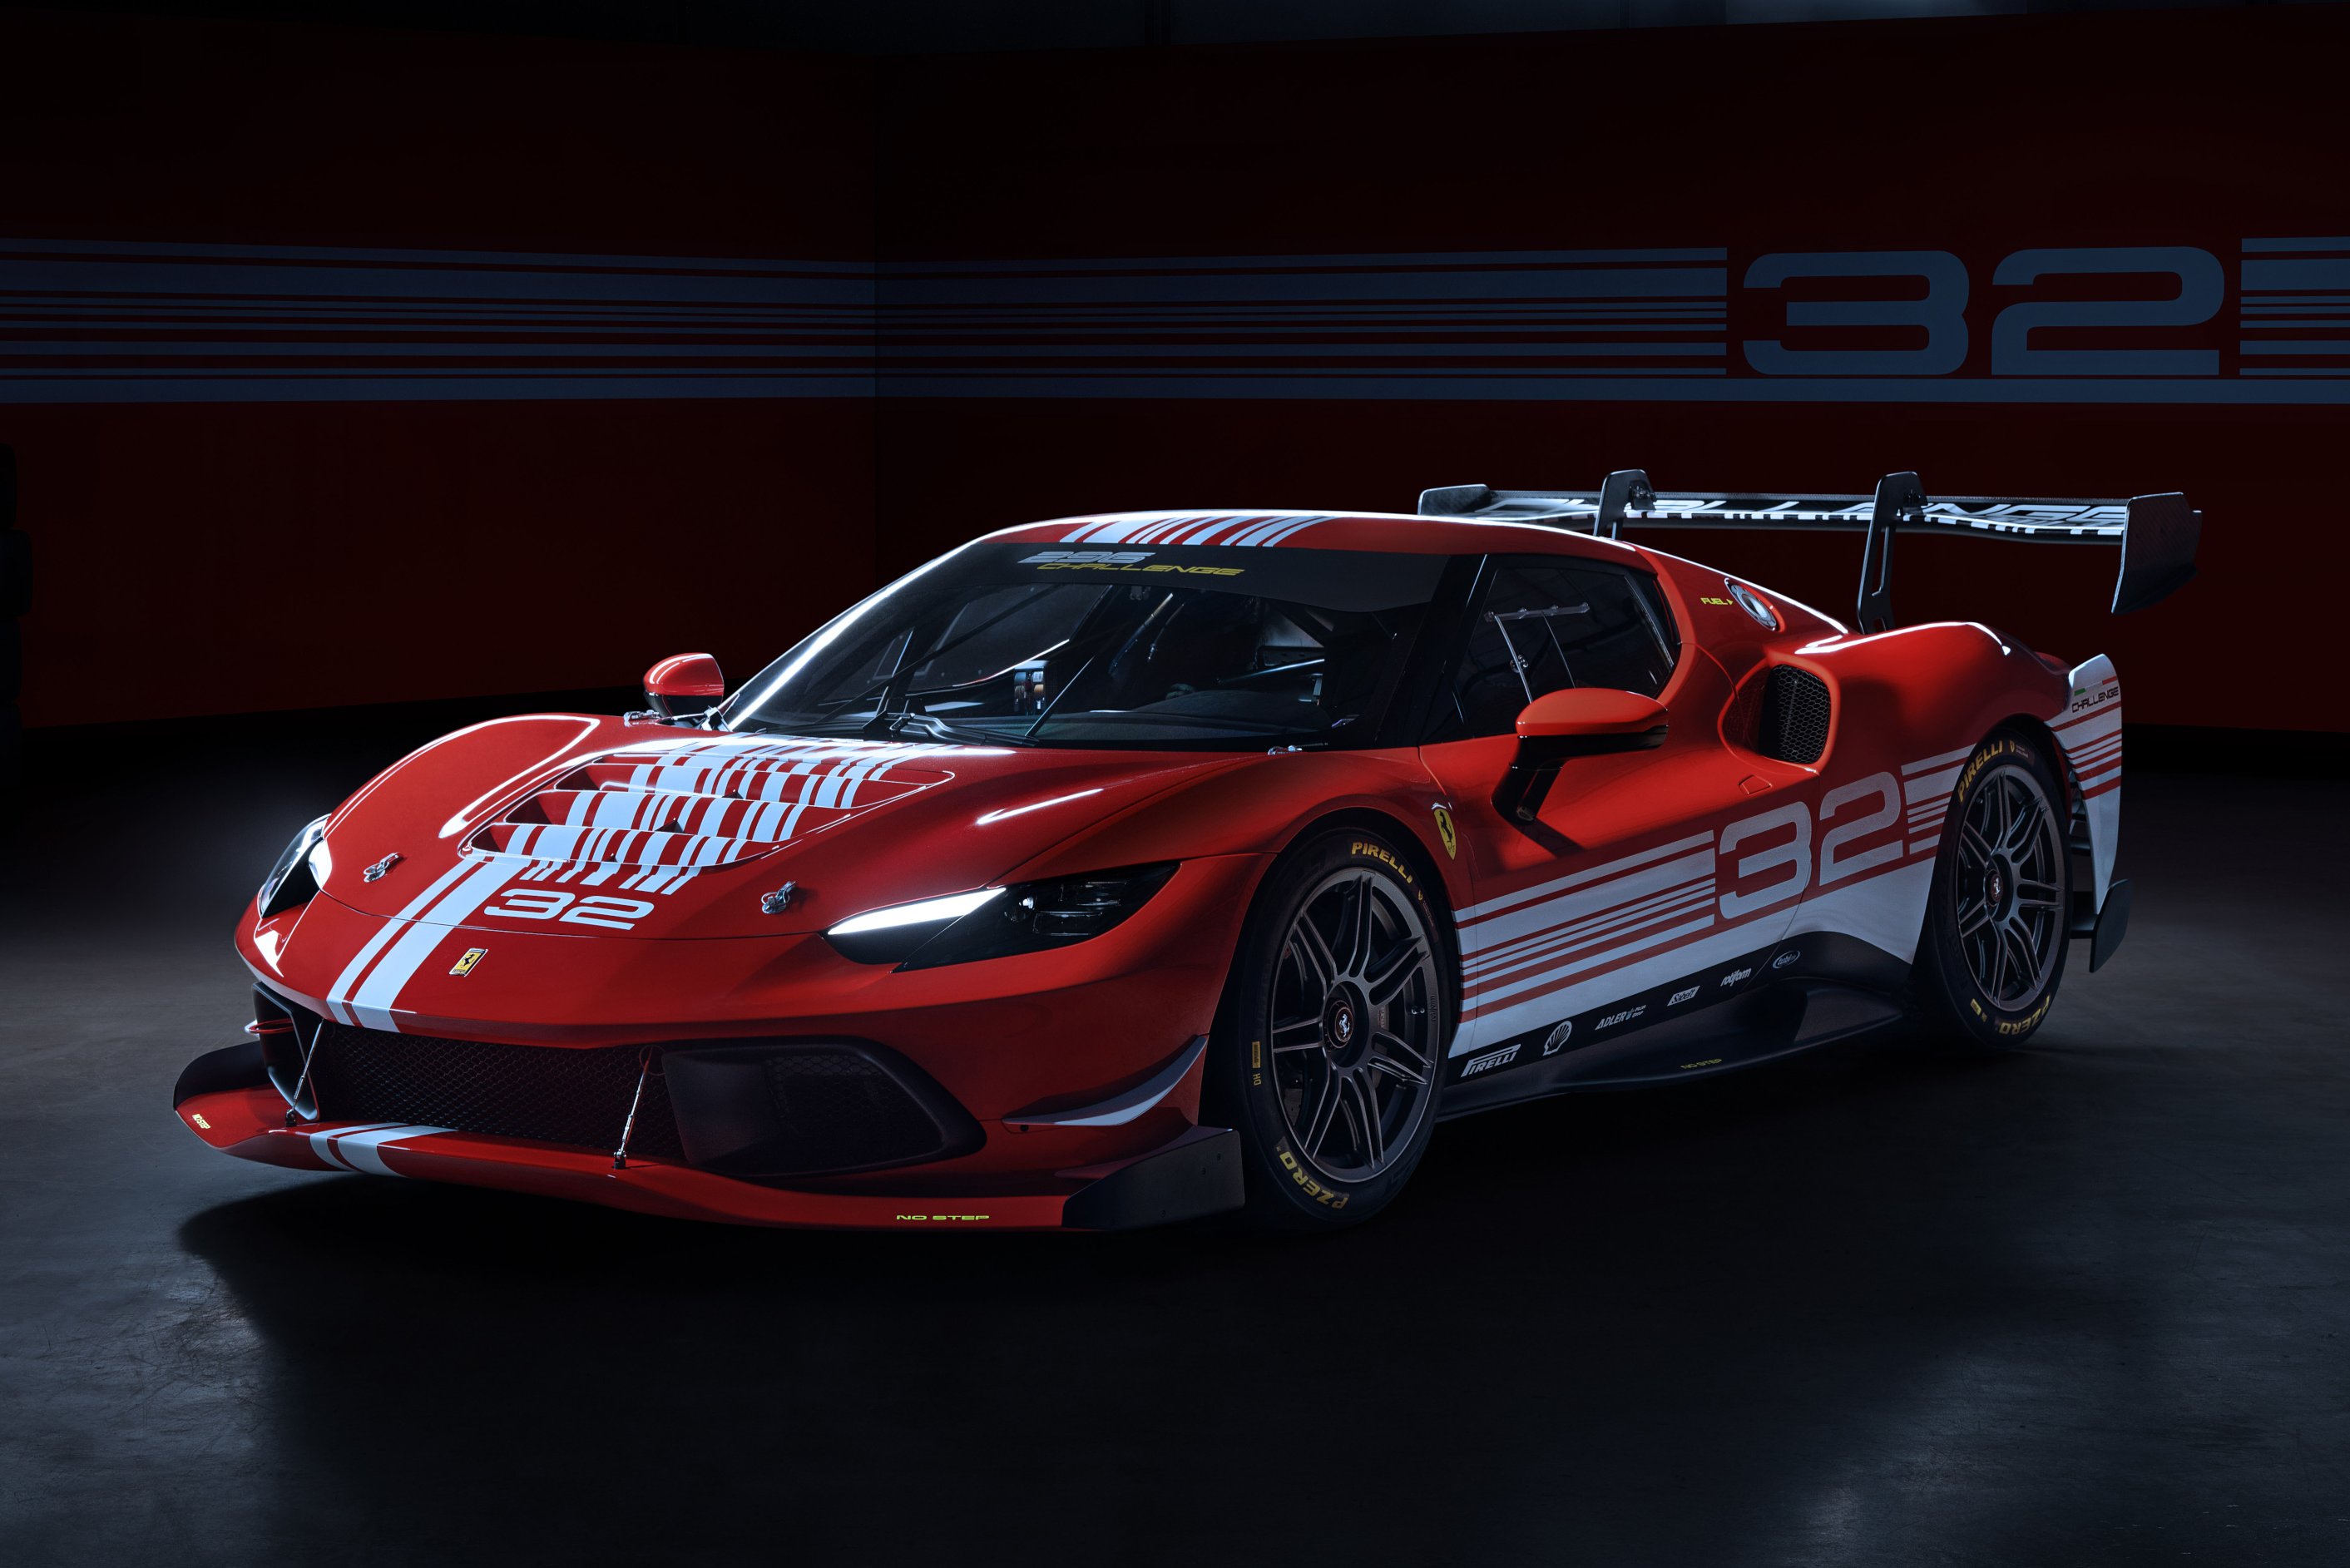 The new Ferrari racing car storms the scene with a world record 4